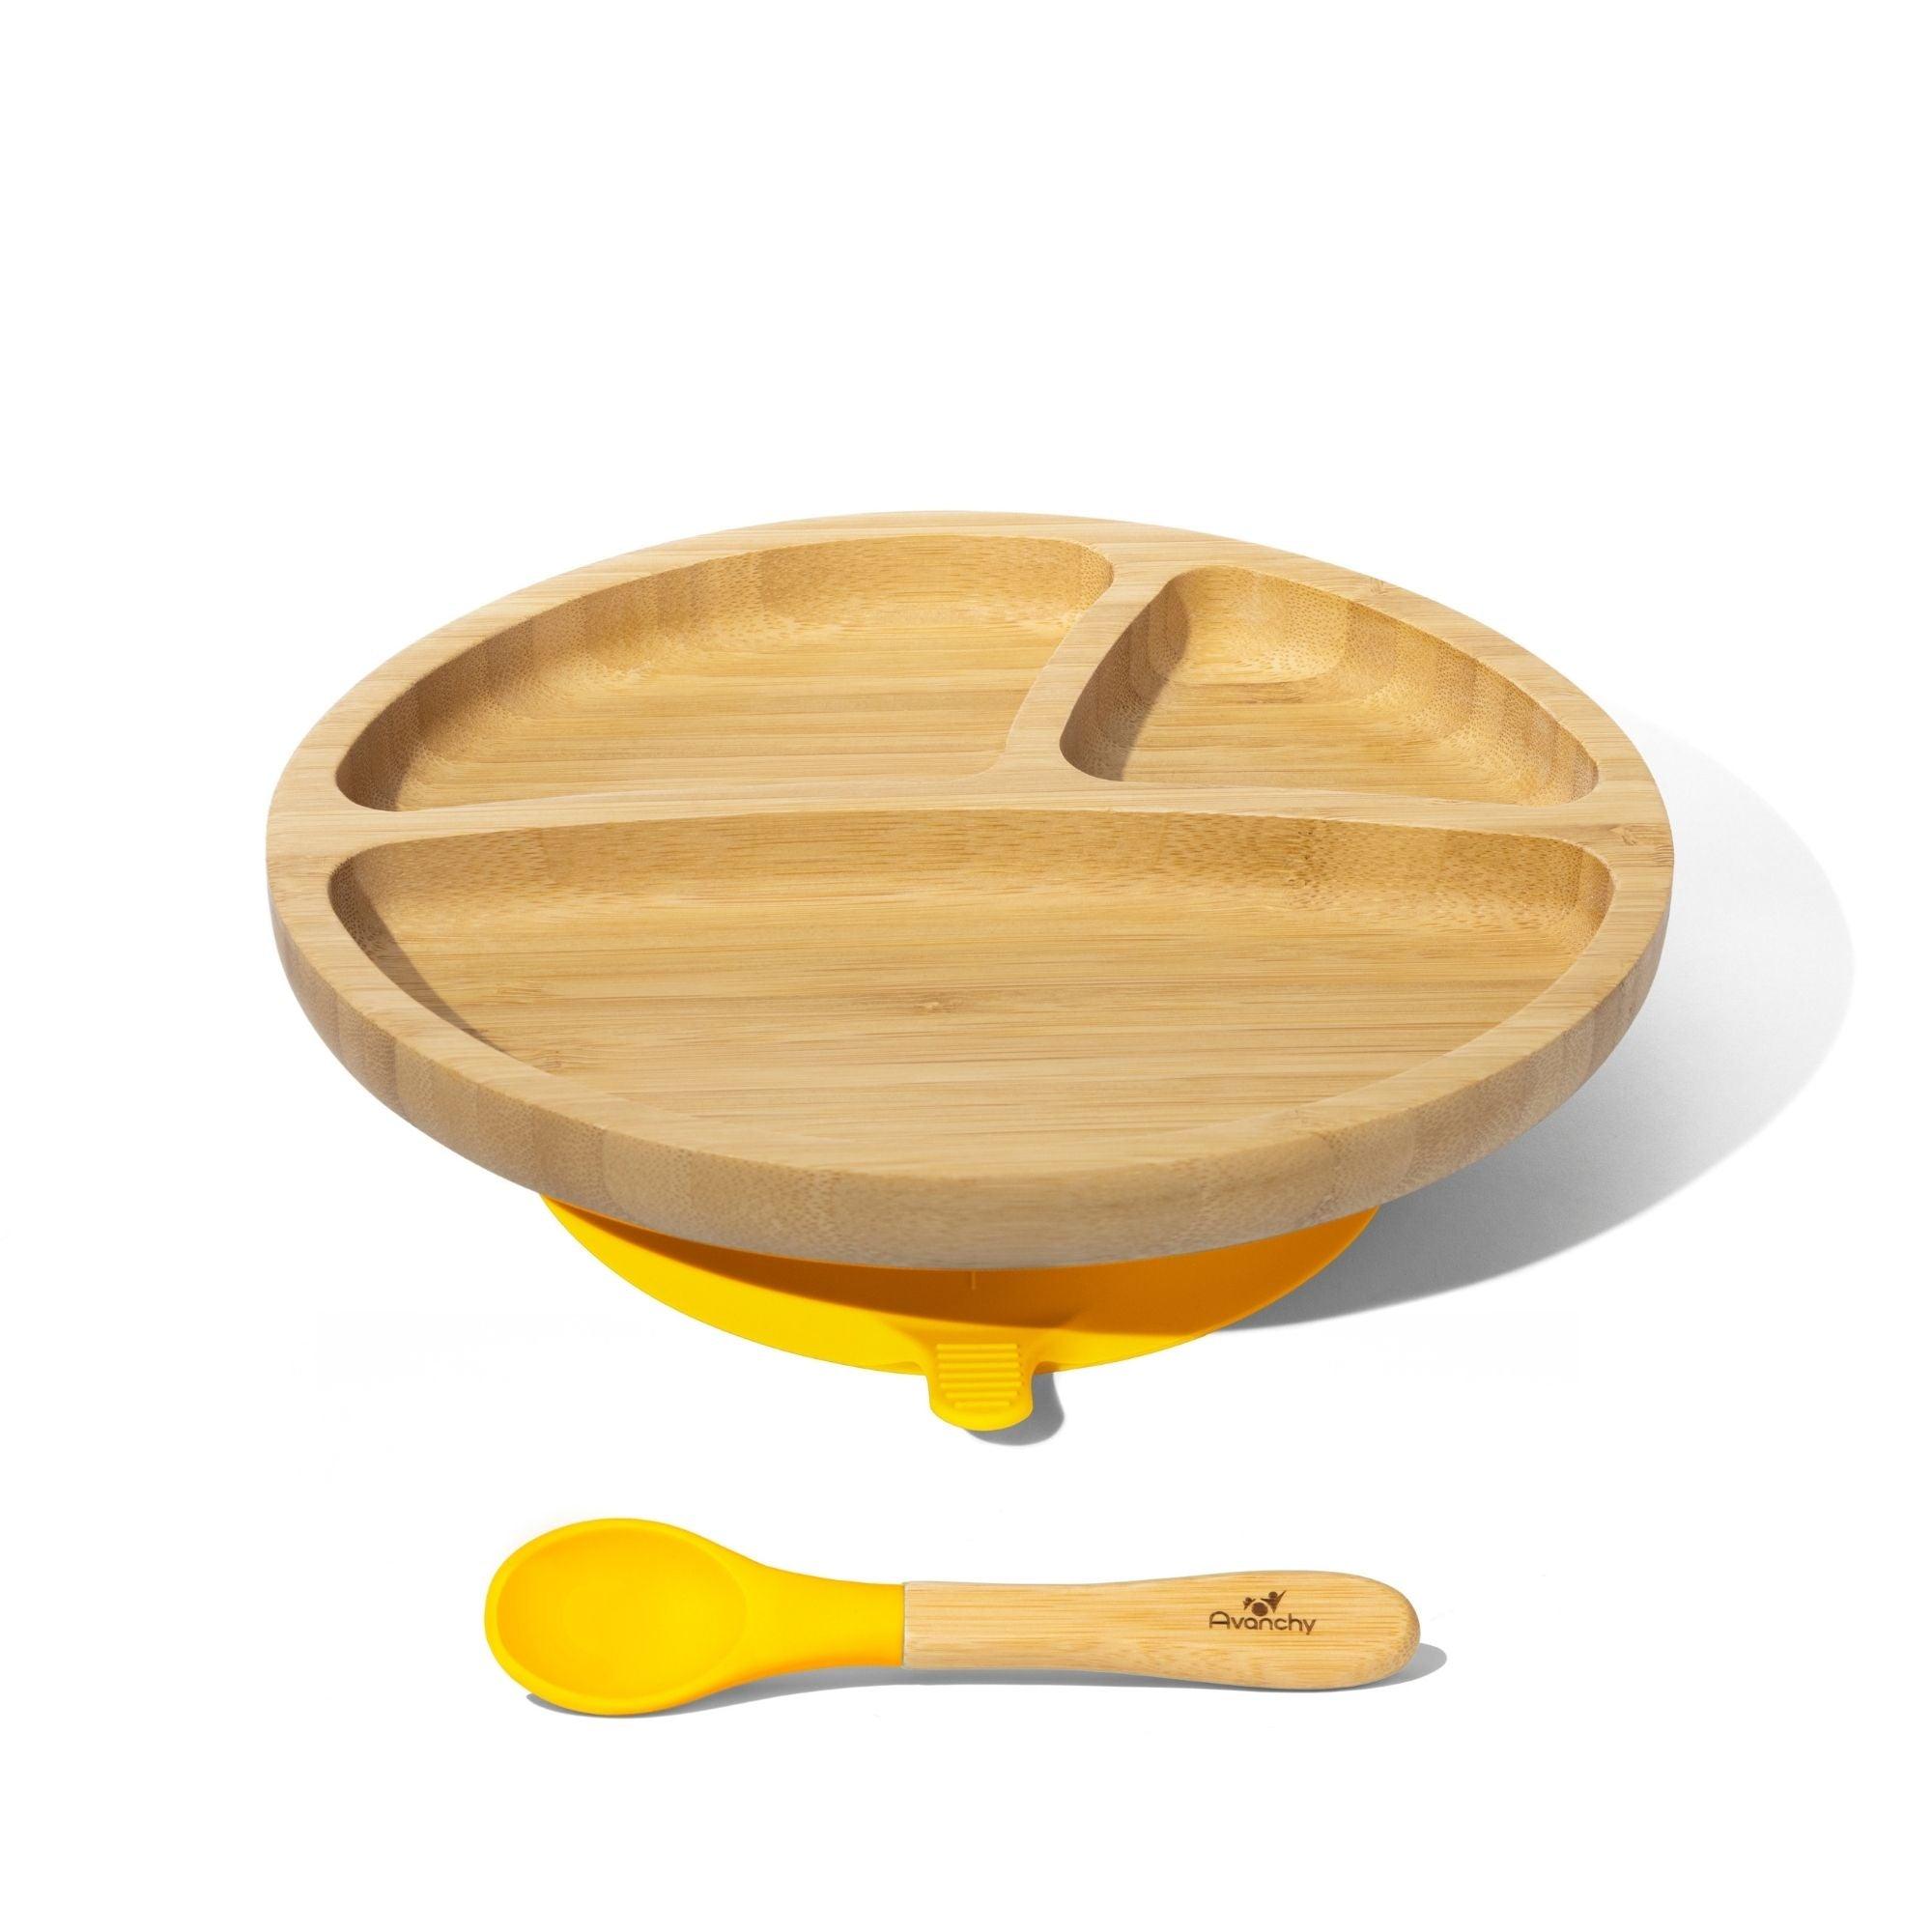 Bamboo Suction Toddler Plate + Spoon - Avanchy Sustainable Baby Dishware